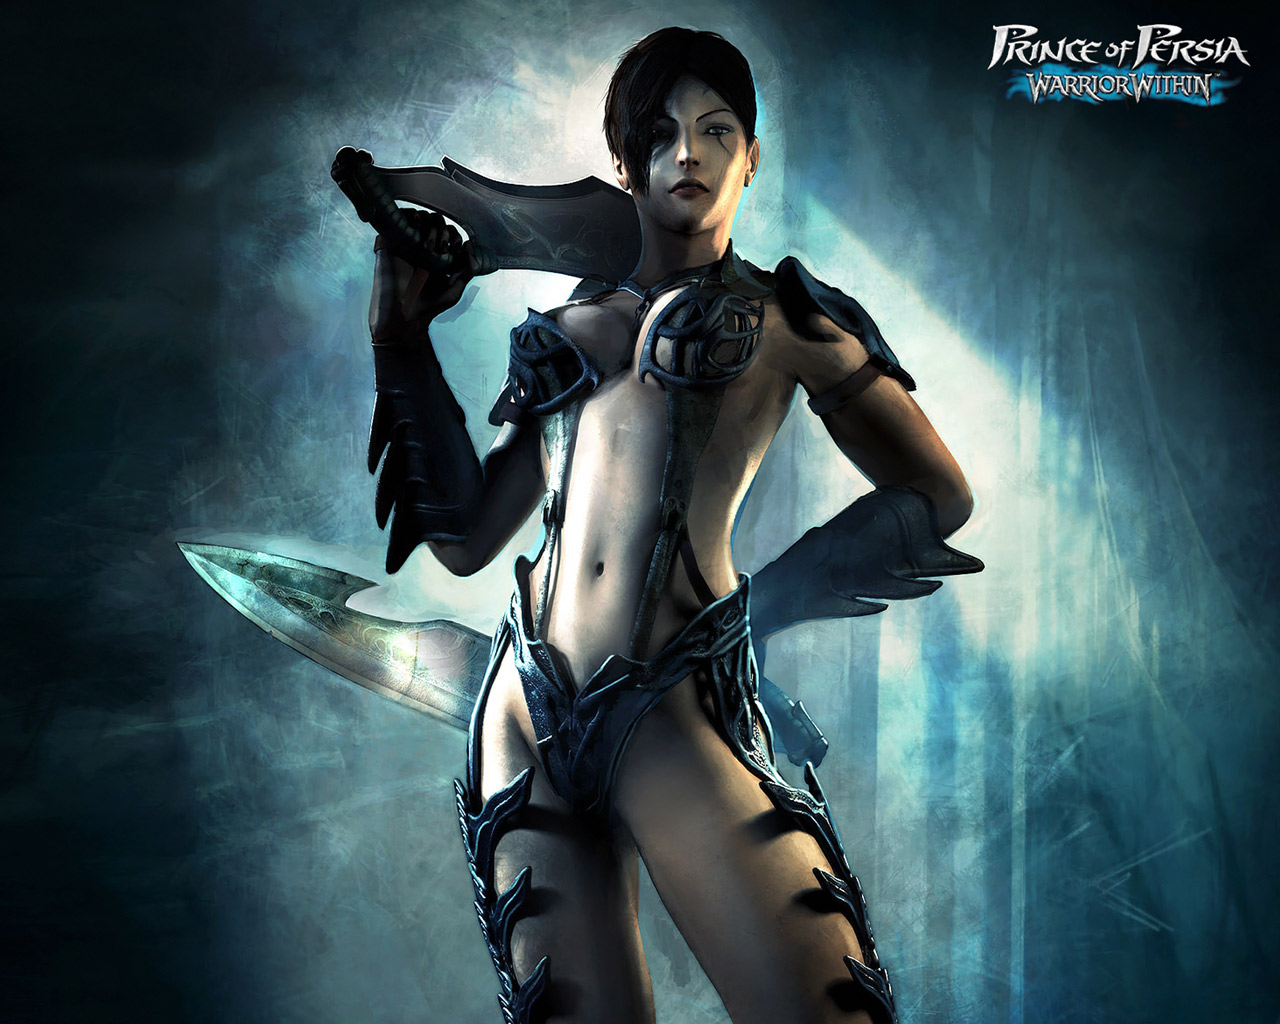 High Resolution Wallpaper | Prince Of Persia: Warrior Within 1280x1024 px